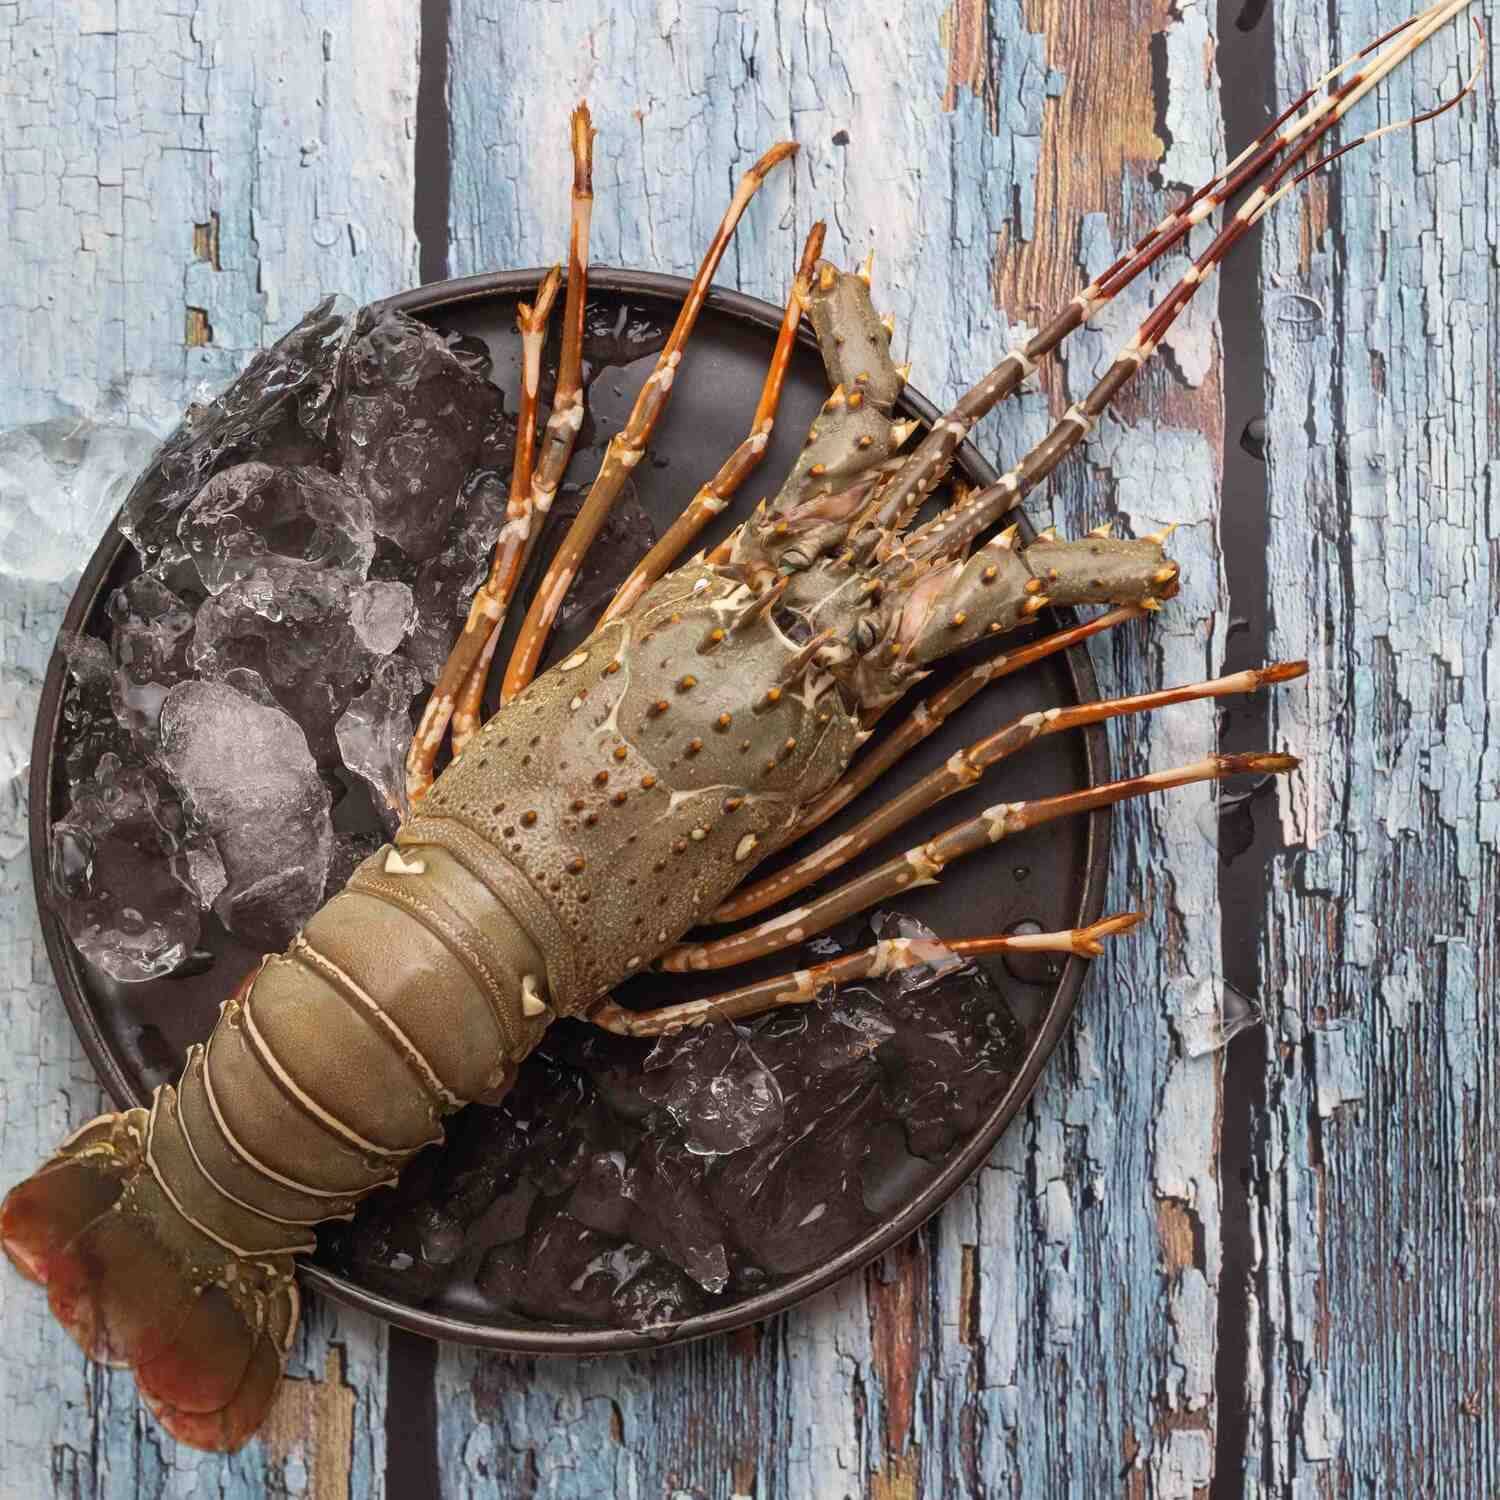 Lobster - Large Size, Cleaned